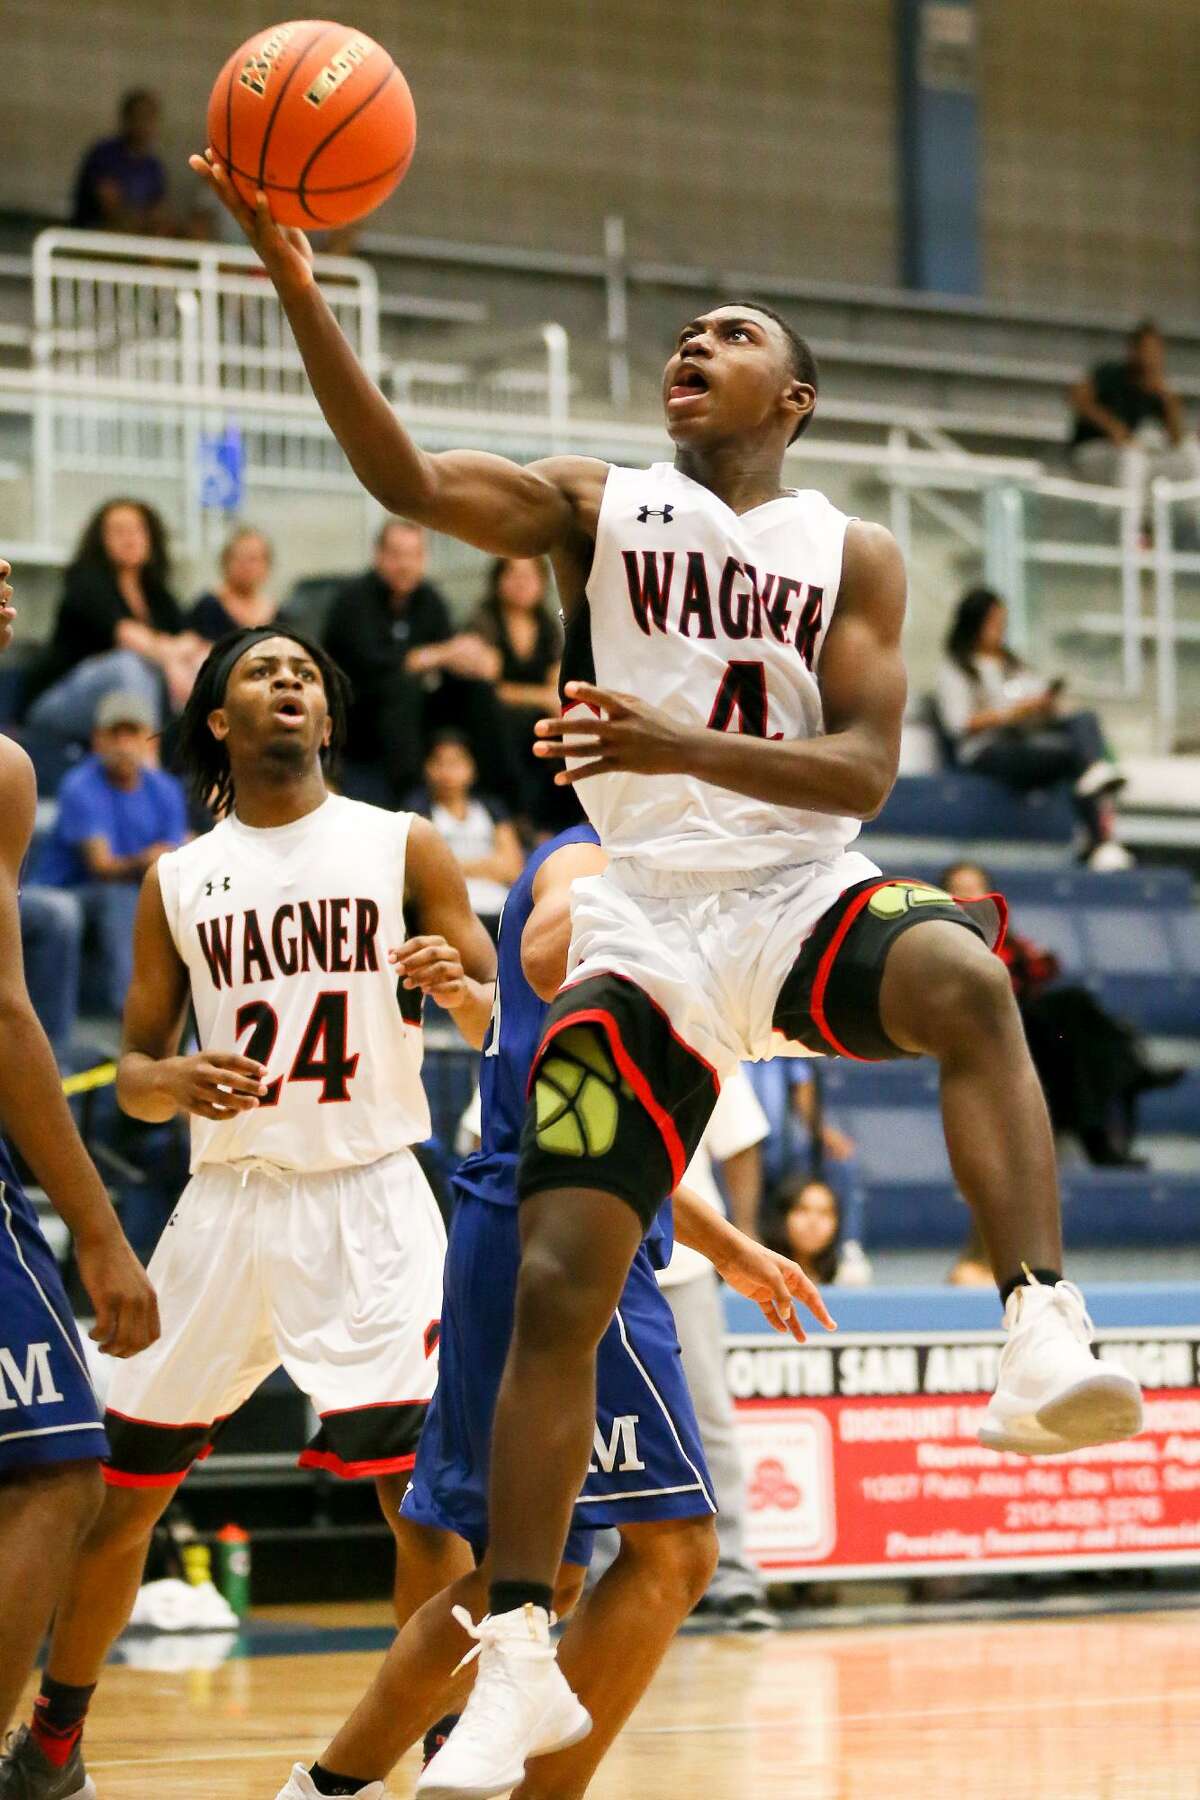 Wagner's Jalen Jackson drives to the basket during their semifinal game with MacArthur in the 2017 South San Antonio Bobcat Boys Varsiy Basketball Tournament game with MacArthur at the South San Athletic Center on Saturday, Dec. 2, 2017. Jackson was named MVP of the tournament after Wagner beat Silsbee 100-68 in the championship game. MARVIN PFEIFFER/mpfeiffer@express-news.net